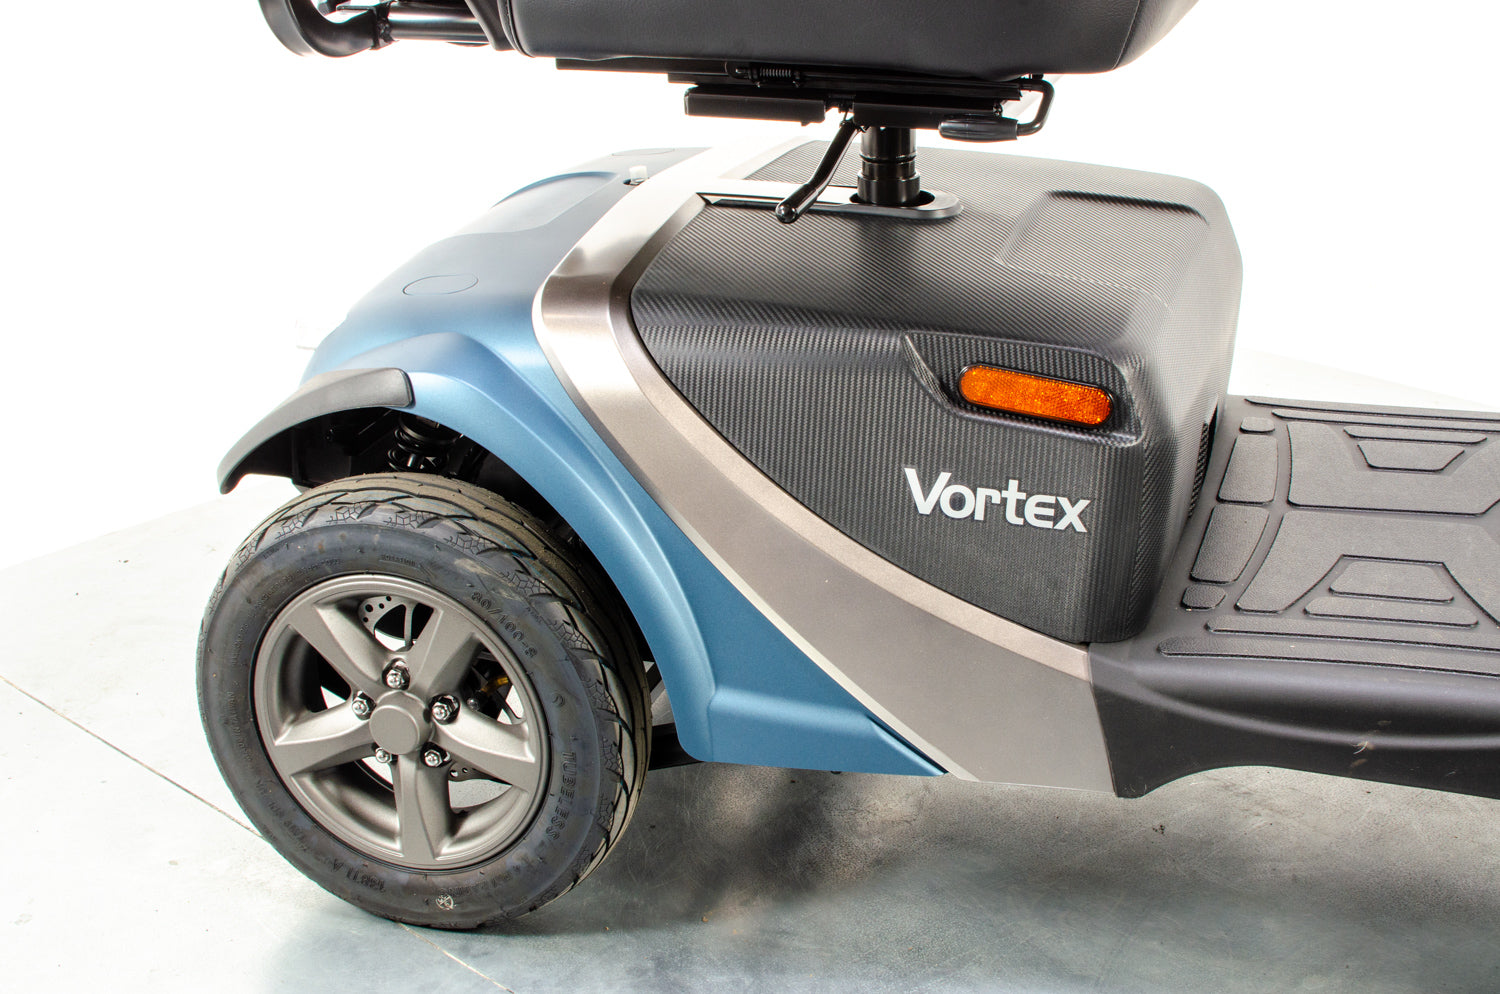 Rascal Vortex Large All Terrain Mobility Scooter